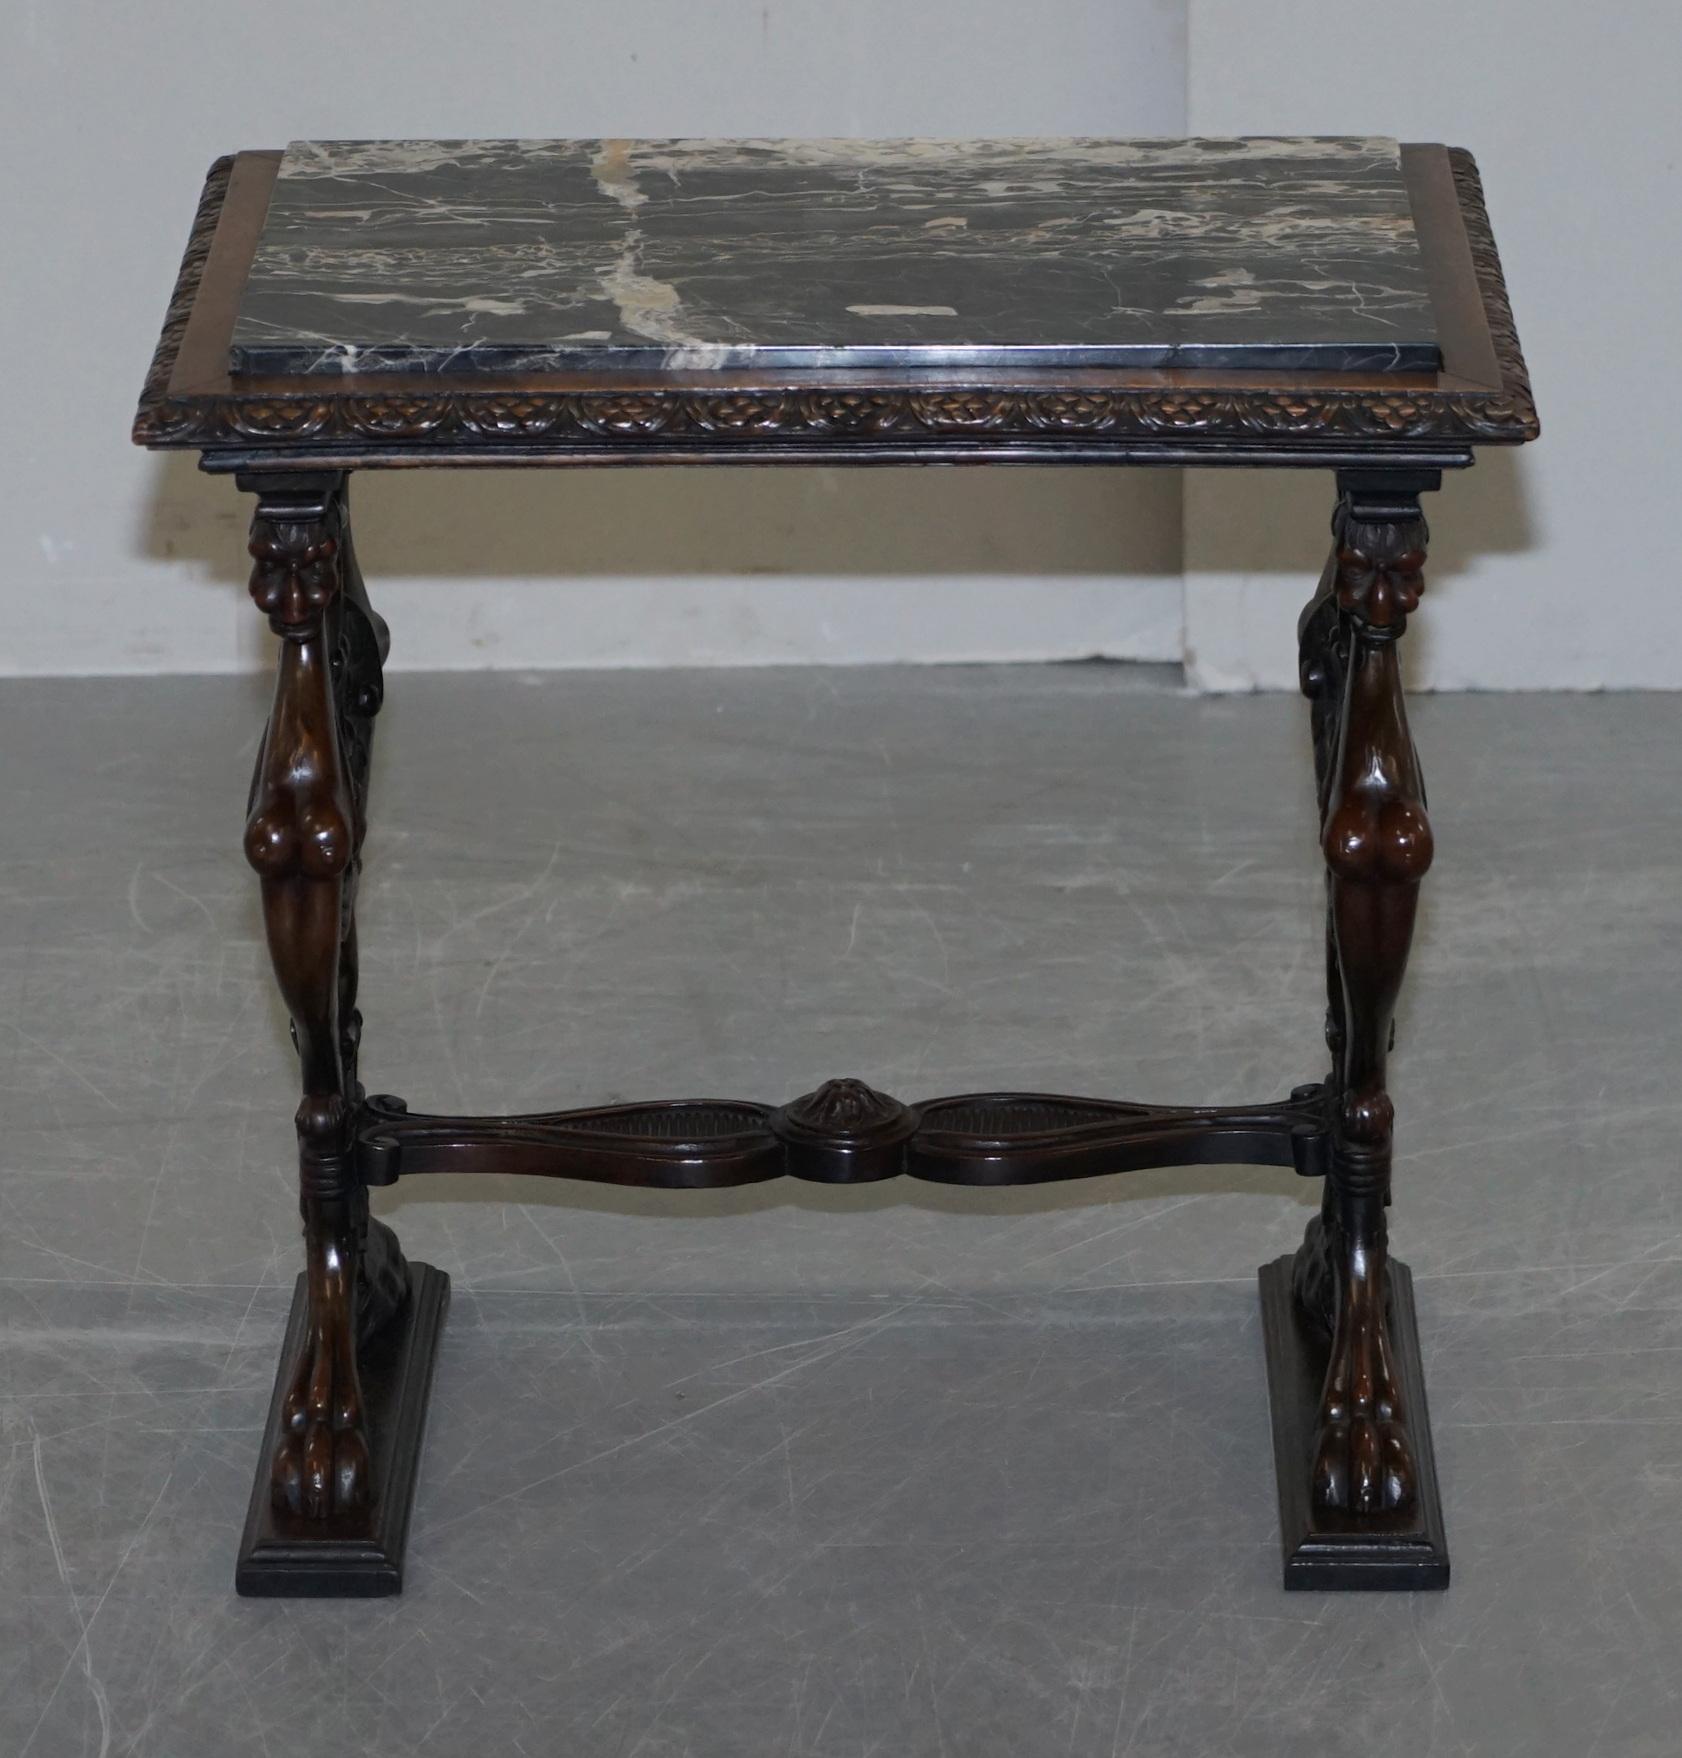 We are delighted to offer for sale this rare and highly collectable circa 1840 hand carved solid oak with marble top side or occasional table 

A very decorative and well made piece. I’ve not seen this type of carving before on a side table, it is